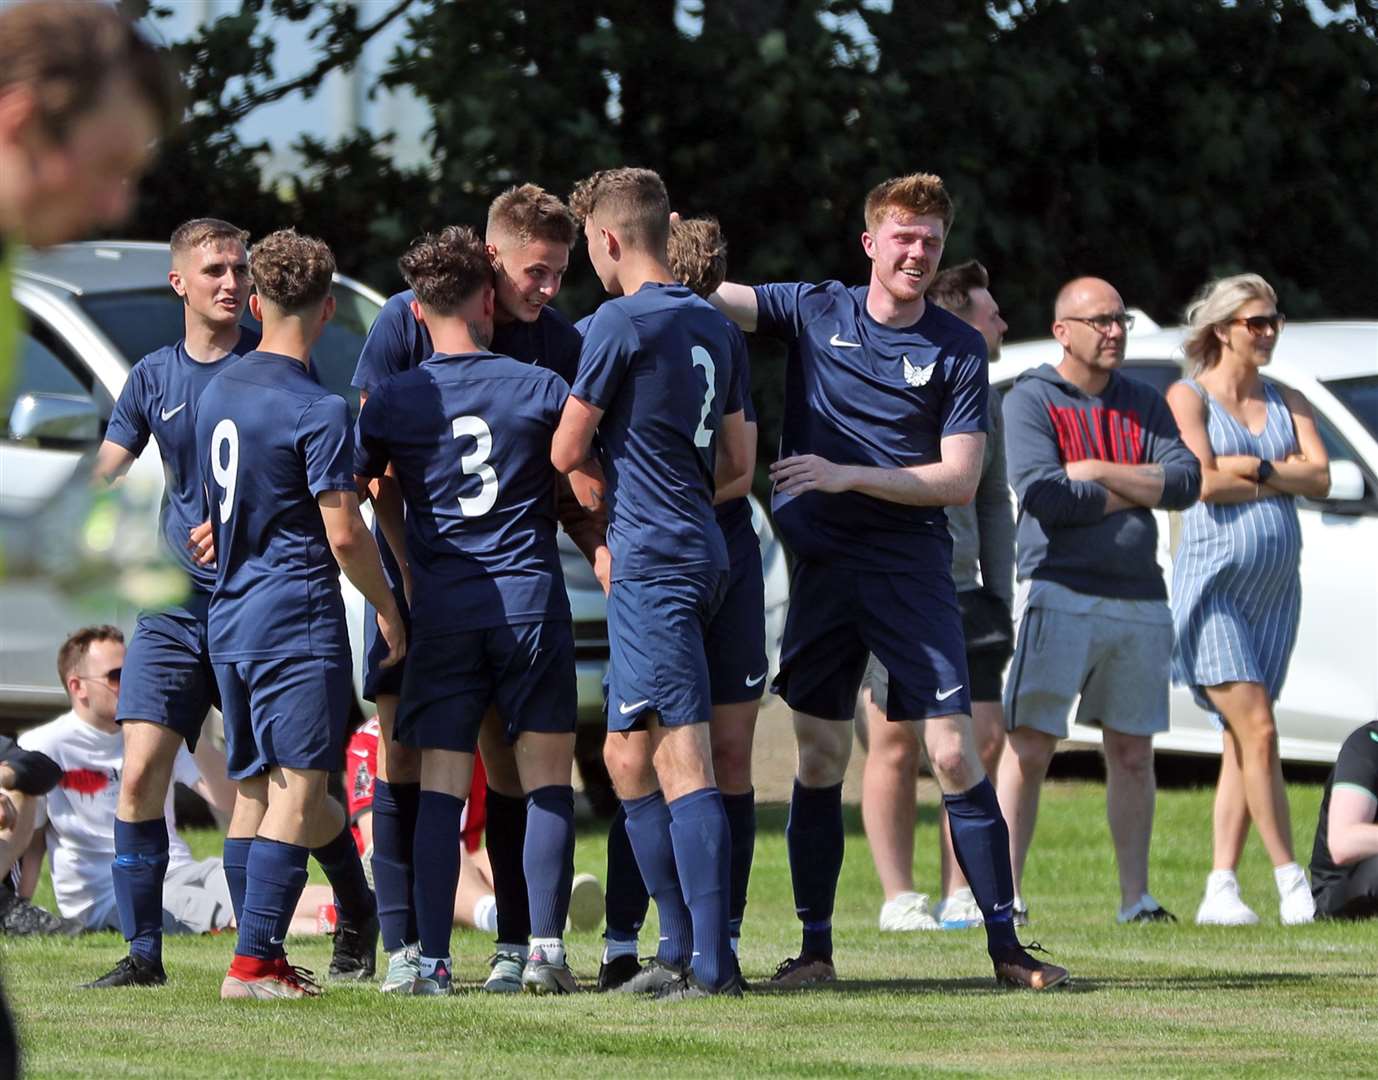 James Mackintosh (centre) is congratulated after scoring the first goal just before half-time. Picture: James Gunn